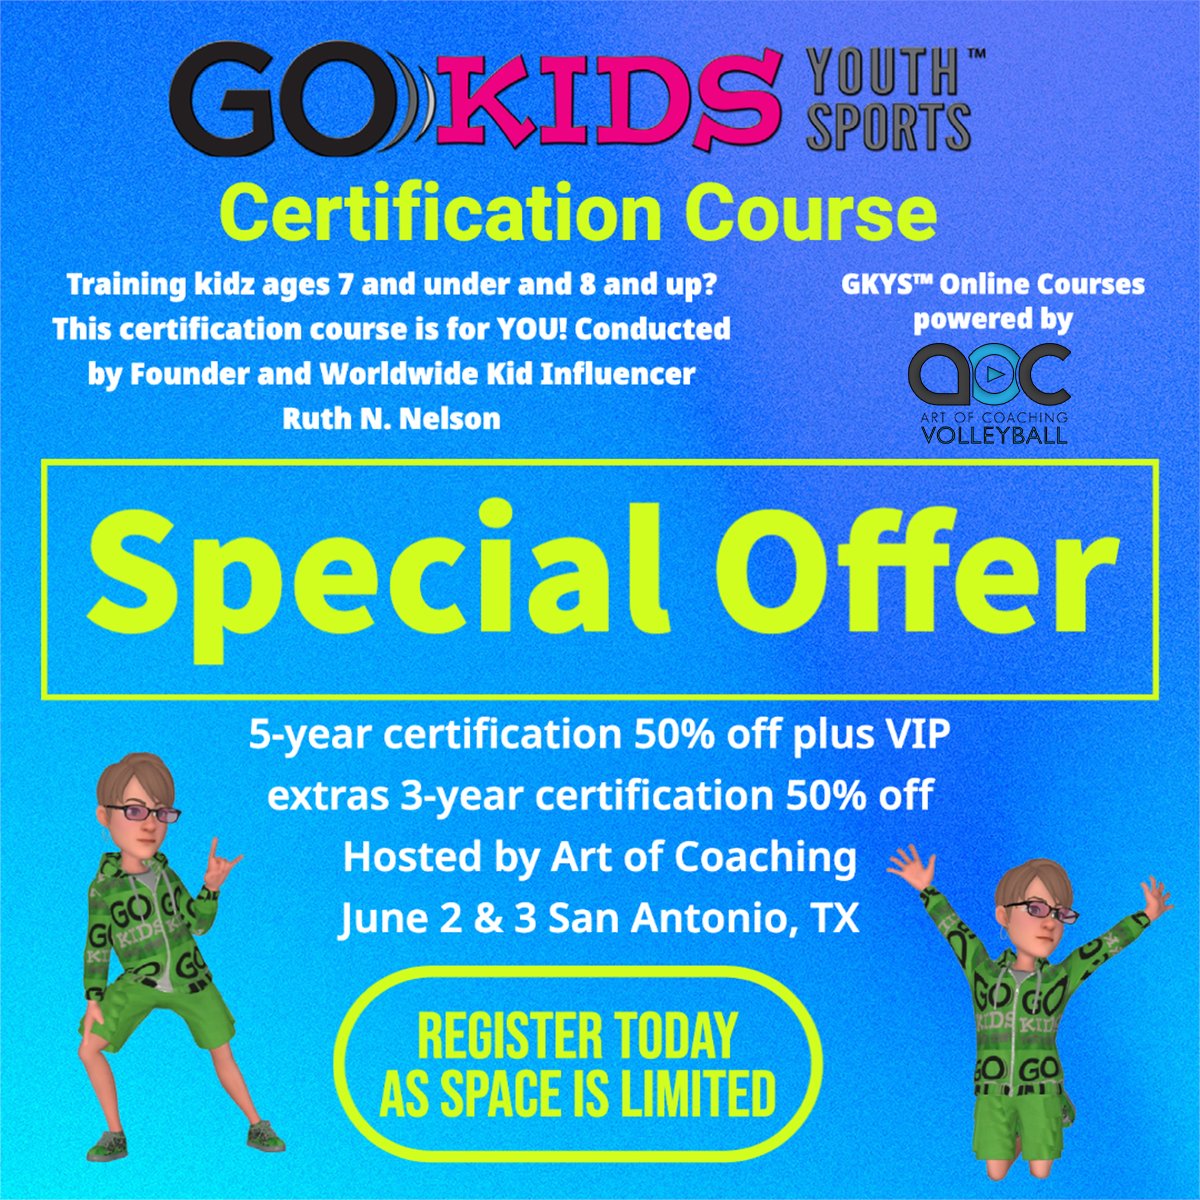 RNNSportsGym™ During the @artofcoachingvb AOC Clinic in San Antonio, Founder and Worldwide Kidz Influencer @rnntrain Ruth Nelson ...VIP Status with benefits for one year when registering TODAY

REGISTER TODAY GOKIDS-YOUTHSPORTS.COM and receive Free VIP @rnnsportsgym membership.